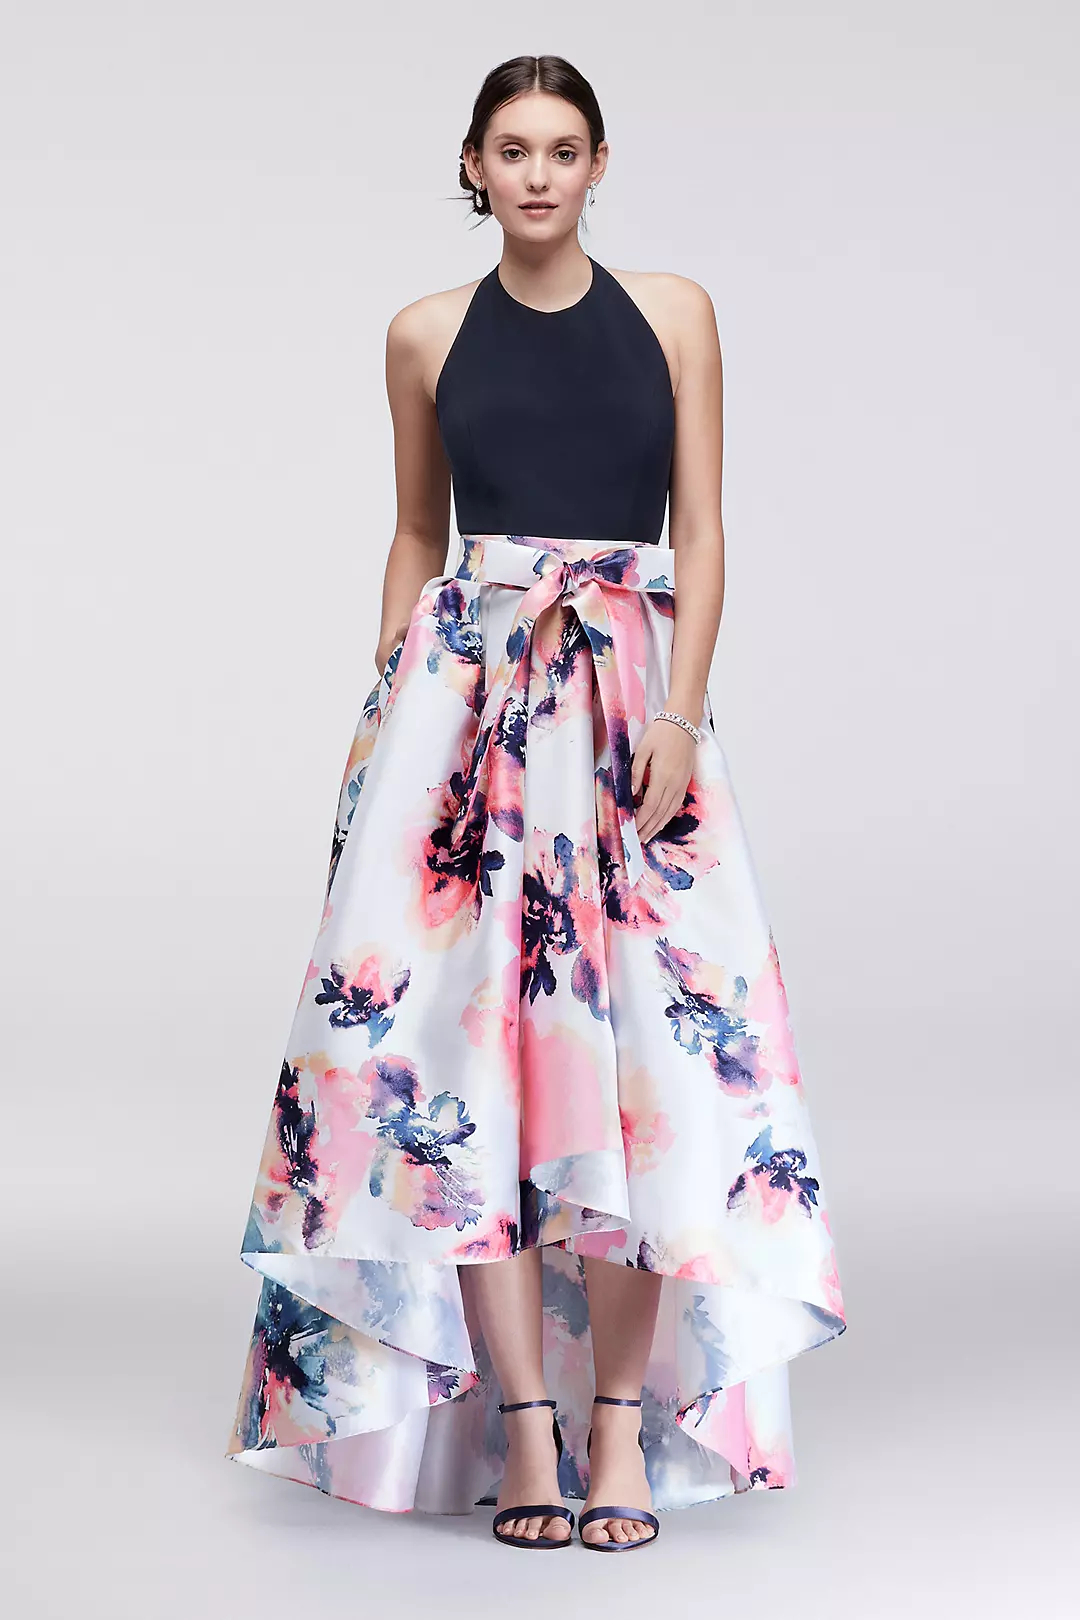 High-Low Halter Dress with Printed Skirt Image